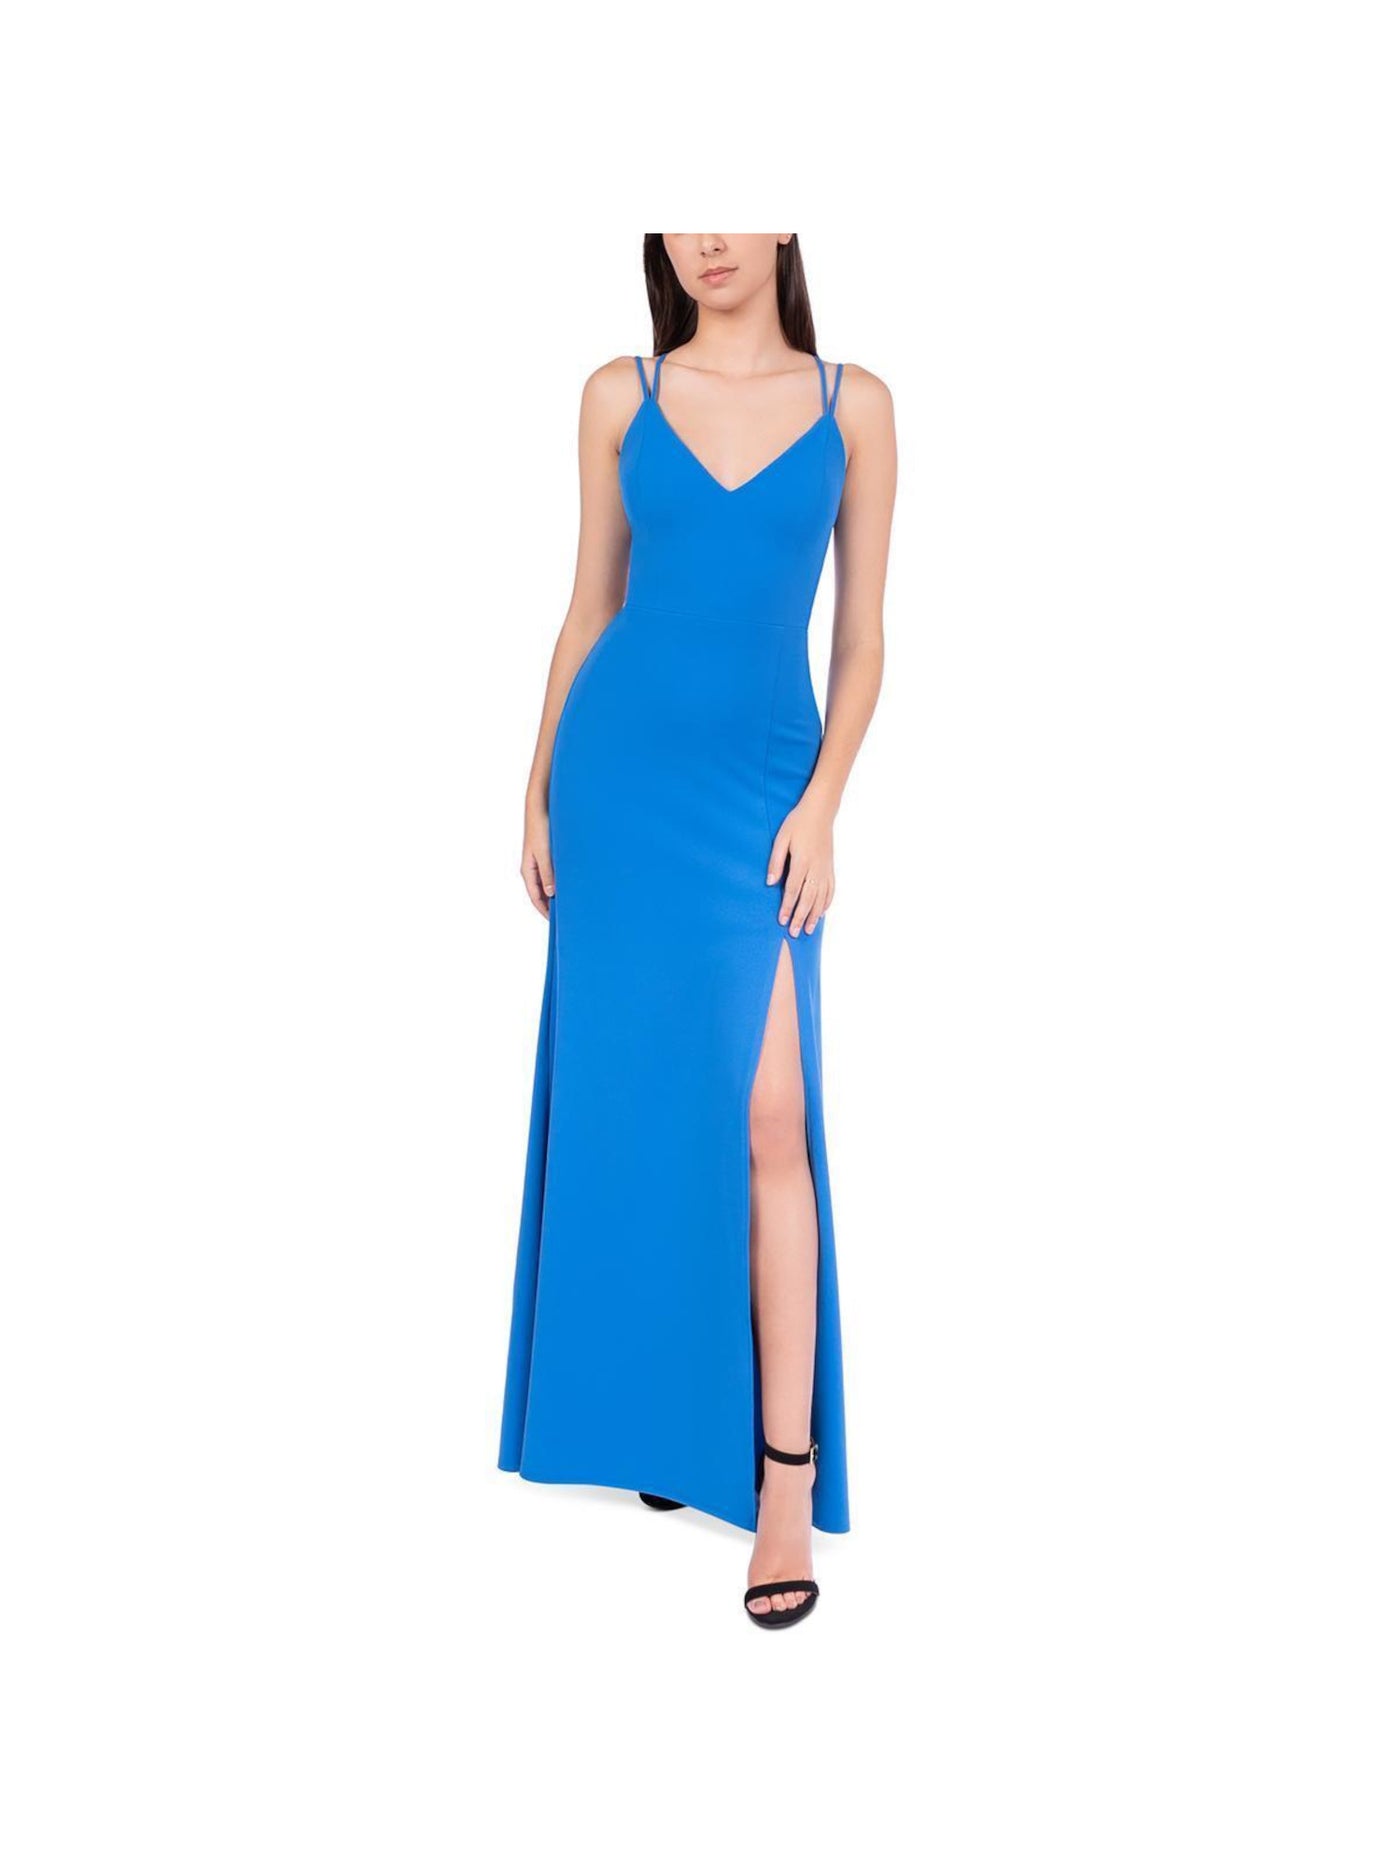 B DARLIN Womens Blue Zippered Lined Lace-up Open Back Thigh-hi Slit Spaghetti Strap V Neck Full-Length  Gown Prom Dress Juniors 3\4